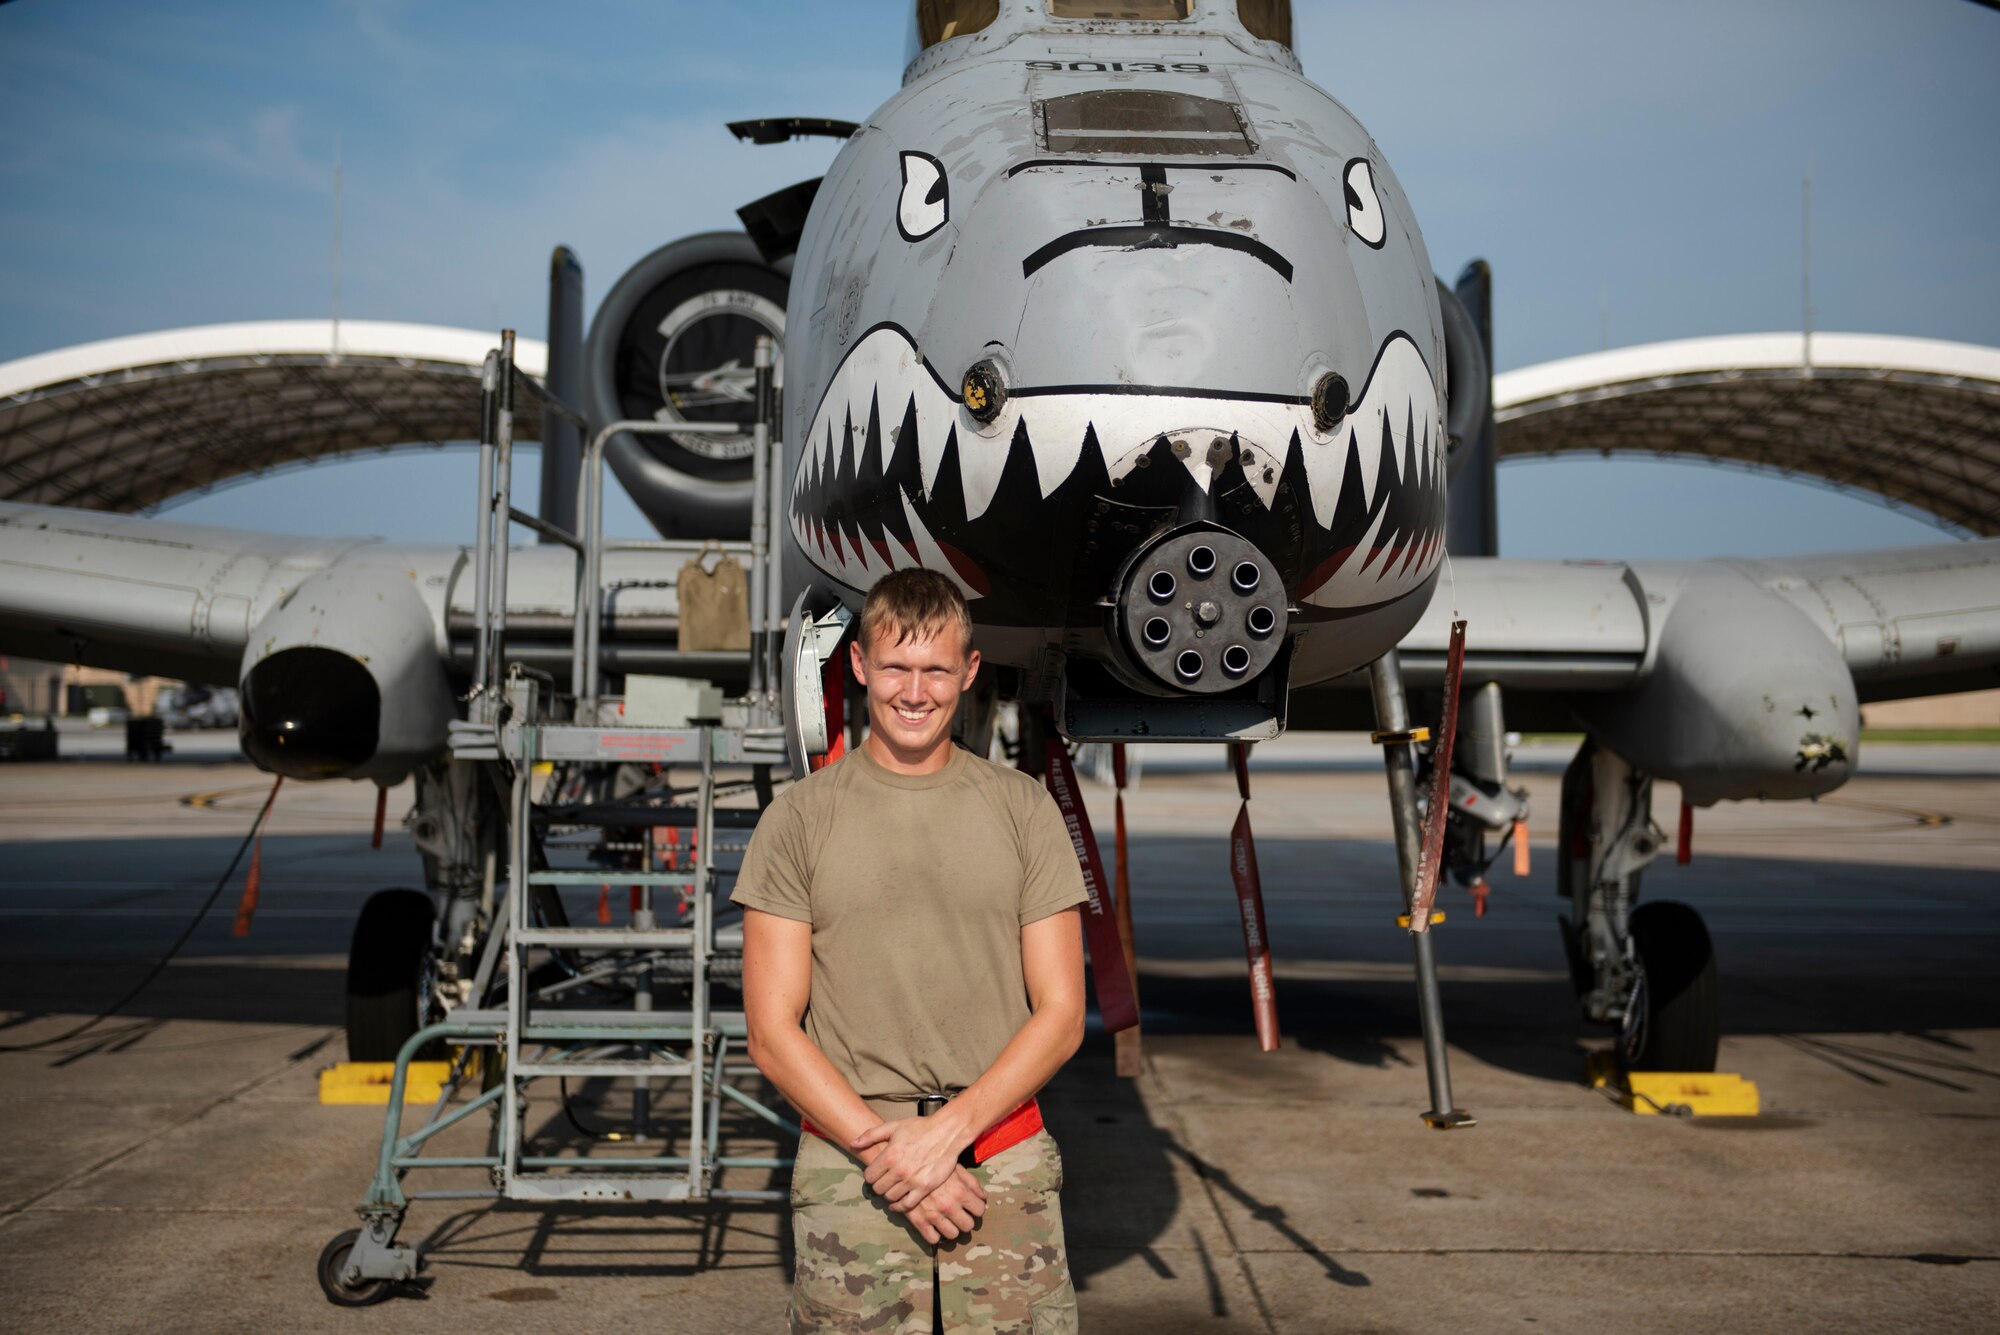 Airman 1st Class Tanner Giroux, 75th Aircraft Maintenance Unit (AMU) avionics technician, poses in front of an A-10C Thunderbolt II, Aug. 8, 2019, at Moody Air Force Base, Ga. The 75th AMU is responsible for the upkeep and maintenance of the Air Force’s largest operational A-10C Thunderbolt II fighter group. (U.S.  Air Force photo by 2nd Lt. Kaylin P. Hankerson)